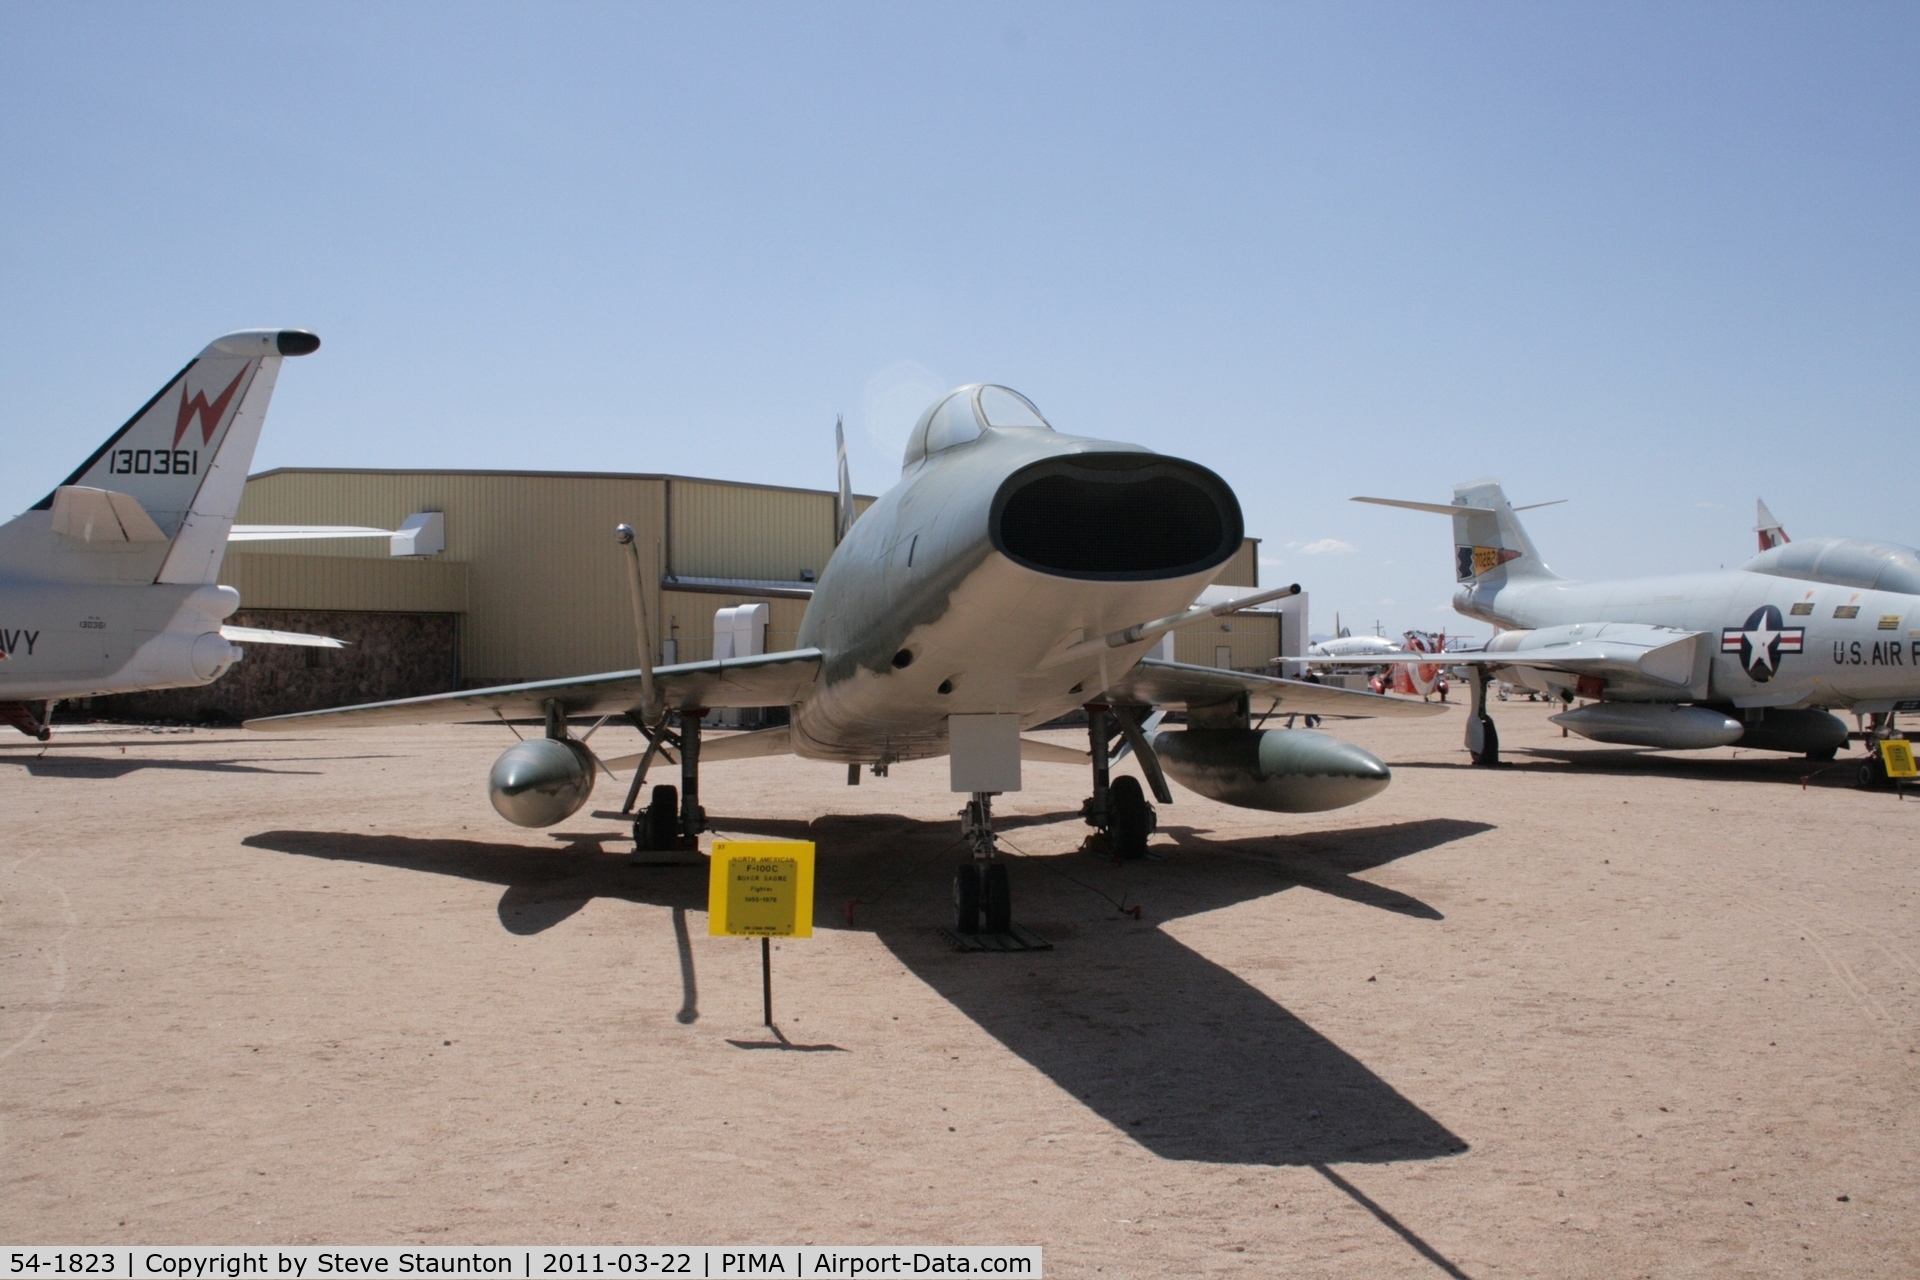 54-1823, 1954 North American F-100C Super Sabre C/N 217-84, Taken at Pima Air and Space Museum, in March 2011 whilst on an Aeroprint Aviation tour